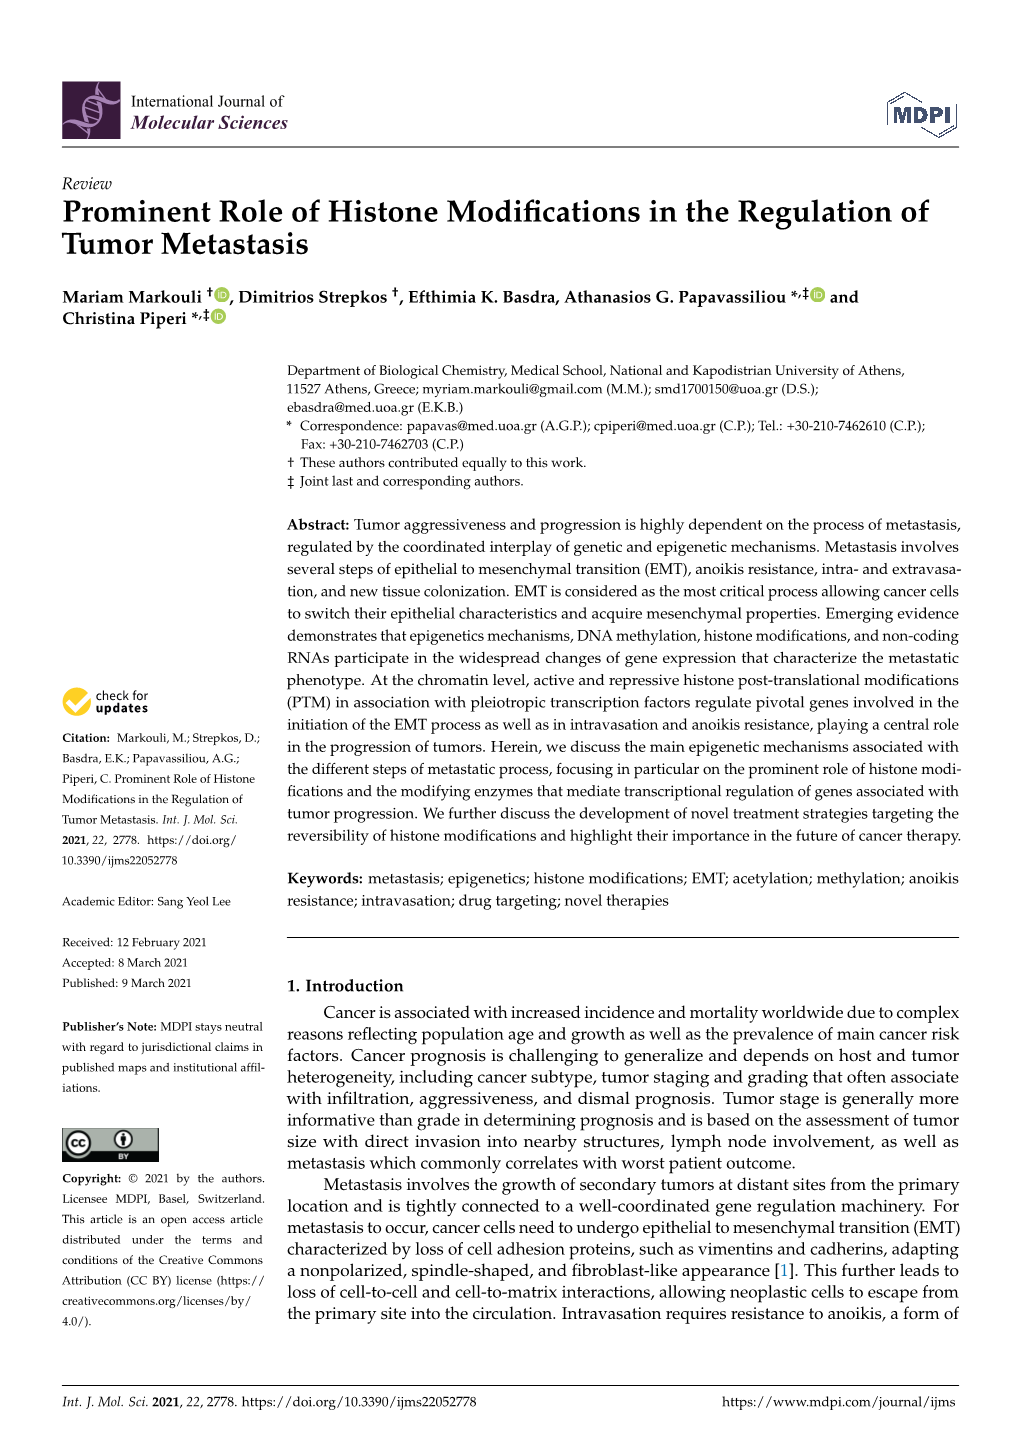 Prominent Role of Histone Modifications in the Regulation of Tumor Metastasis